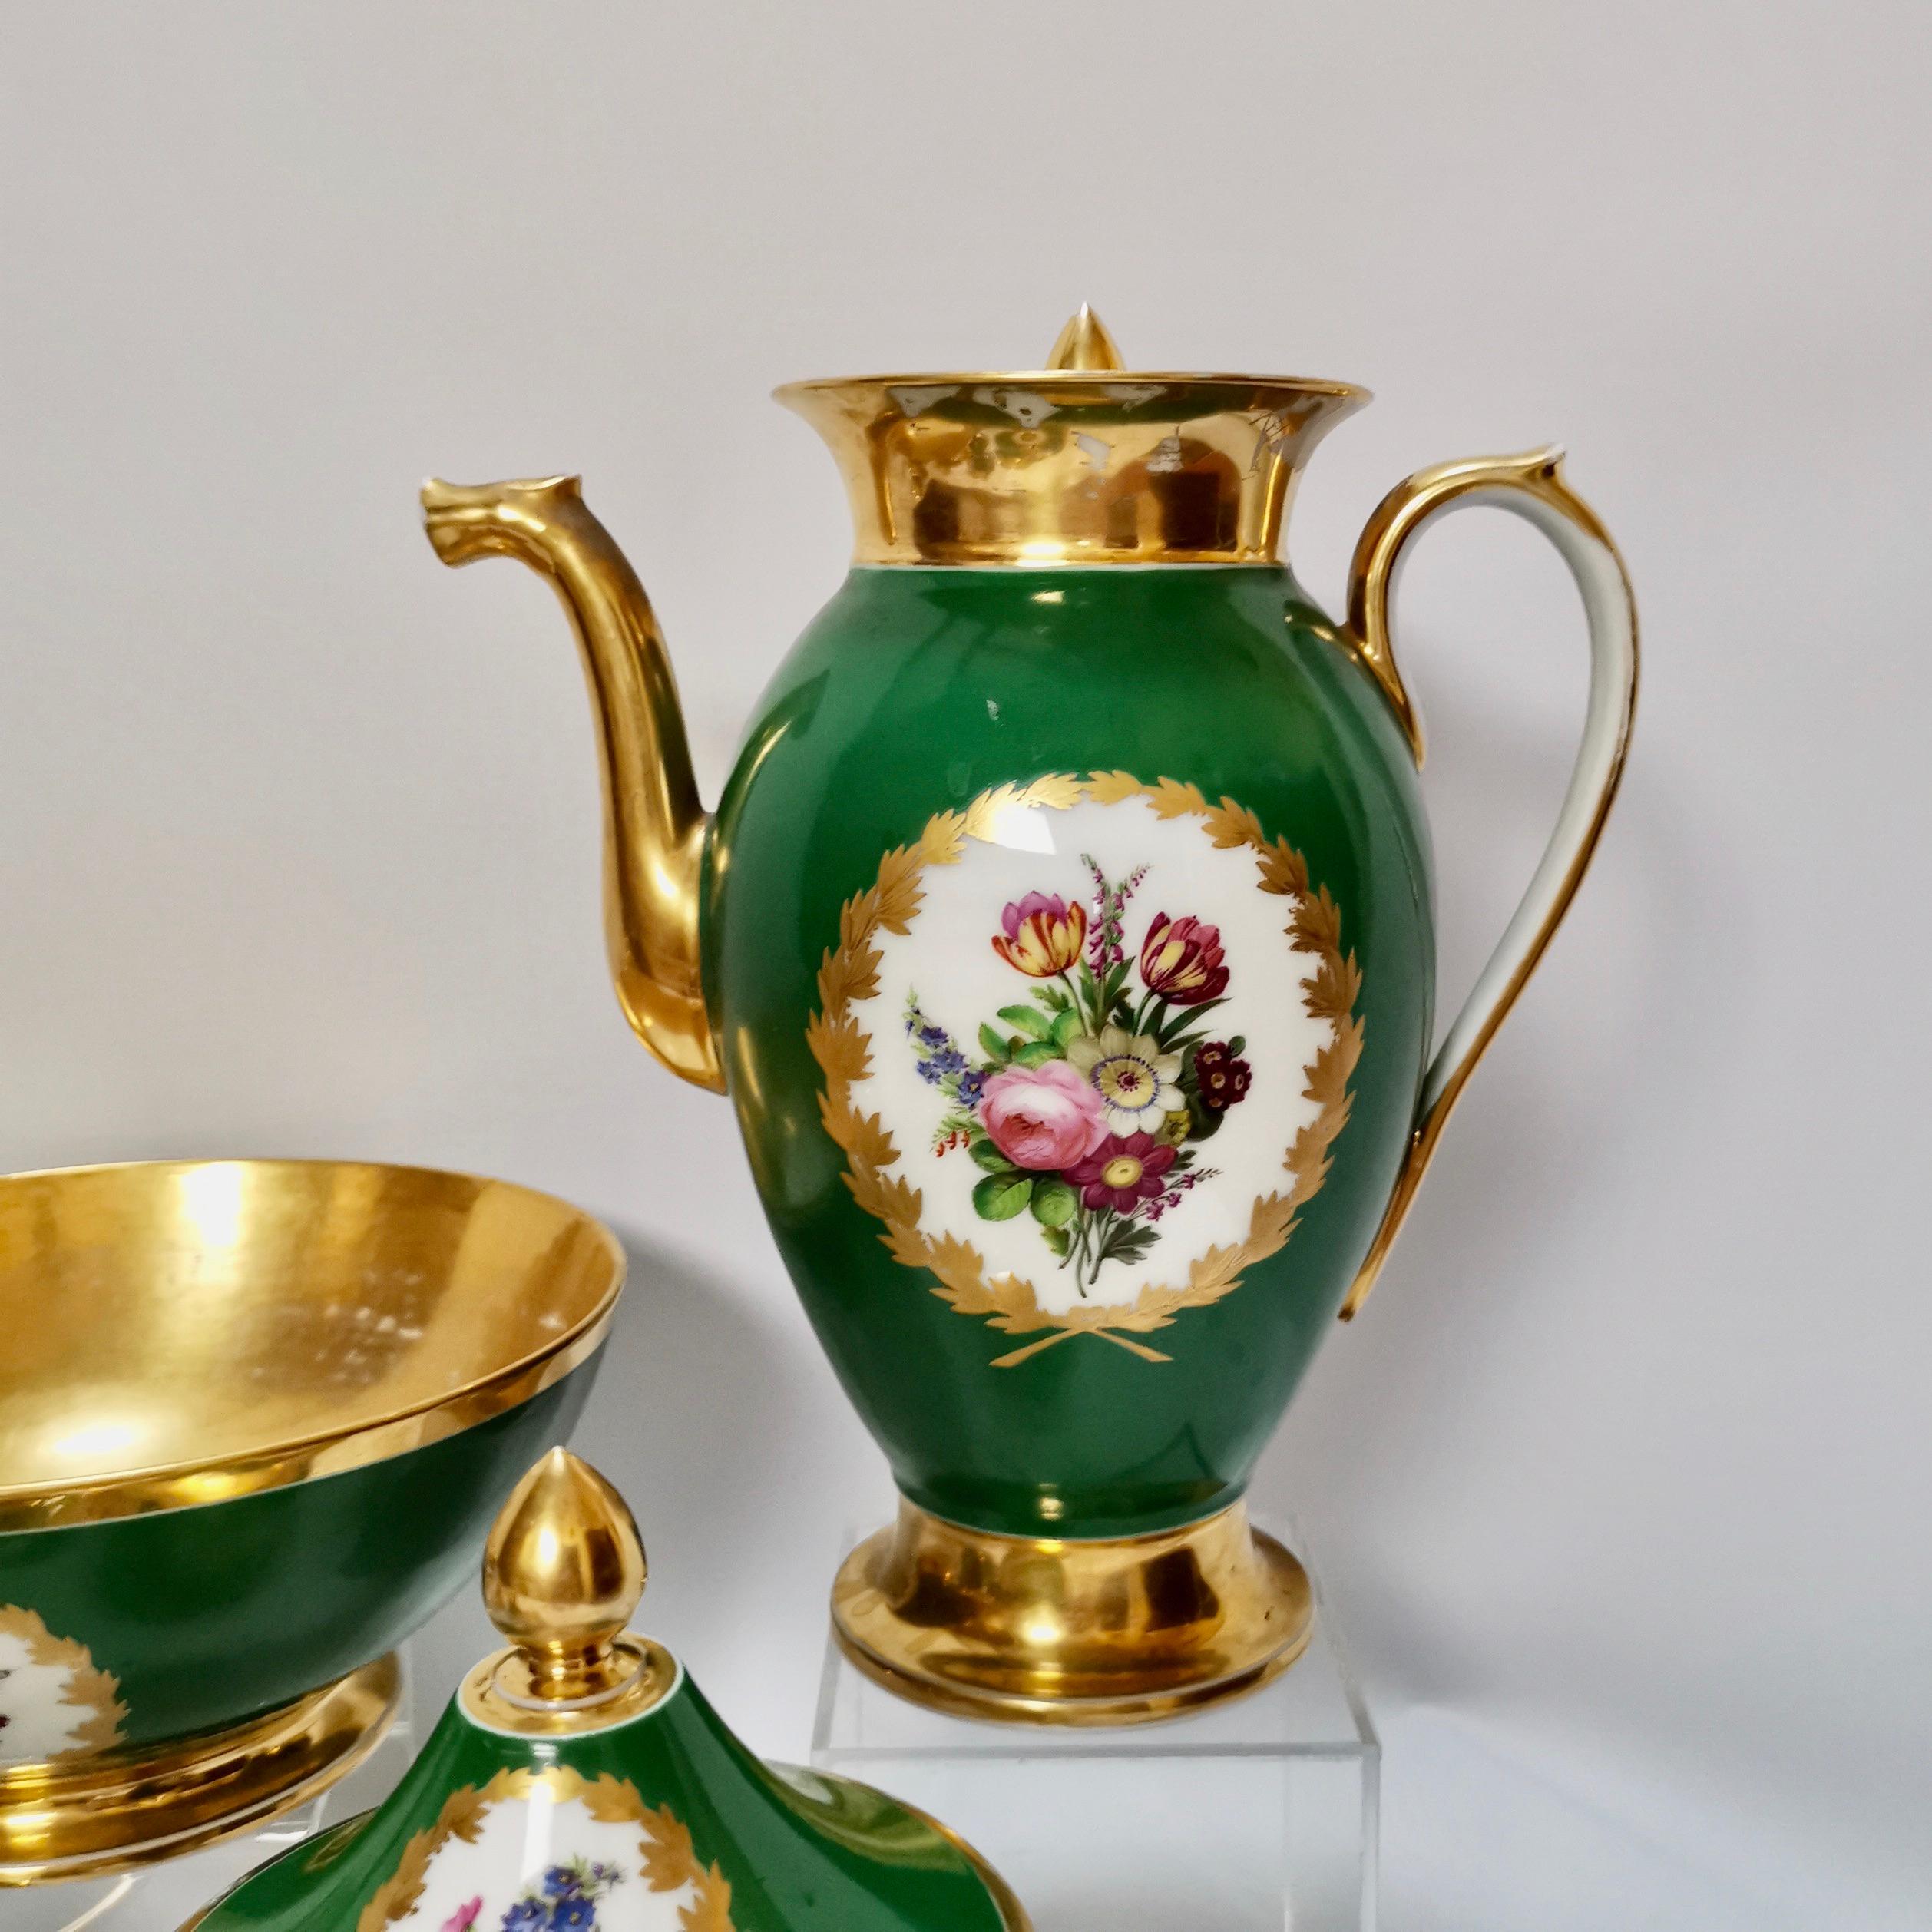 French Paris Porcelain Coffee Service, Emerald Green and Floral, Empire Style ca 1820